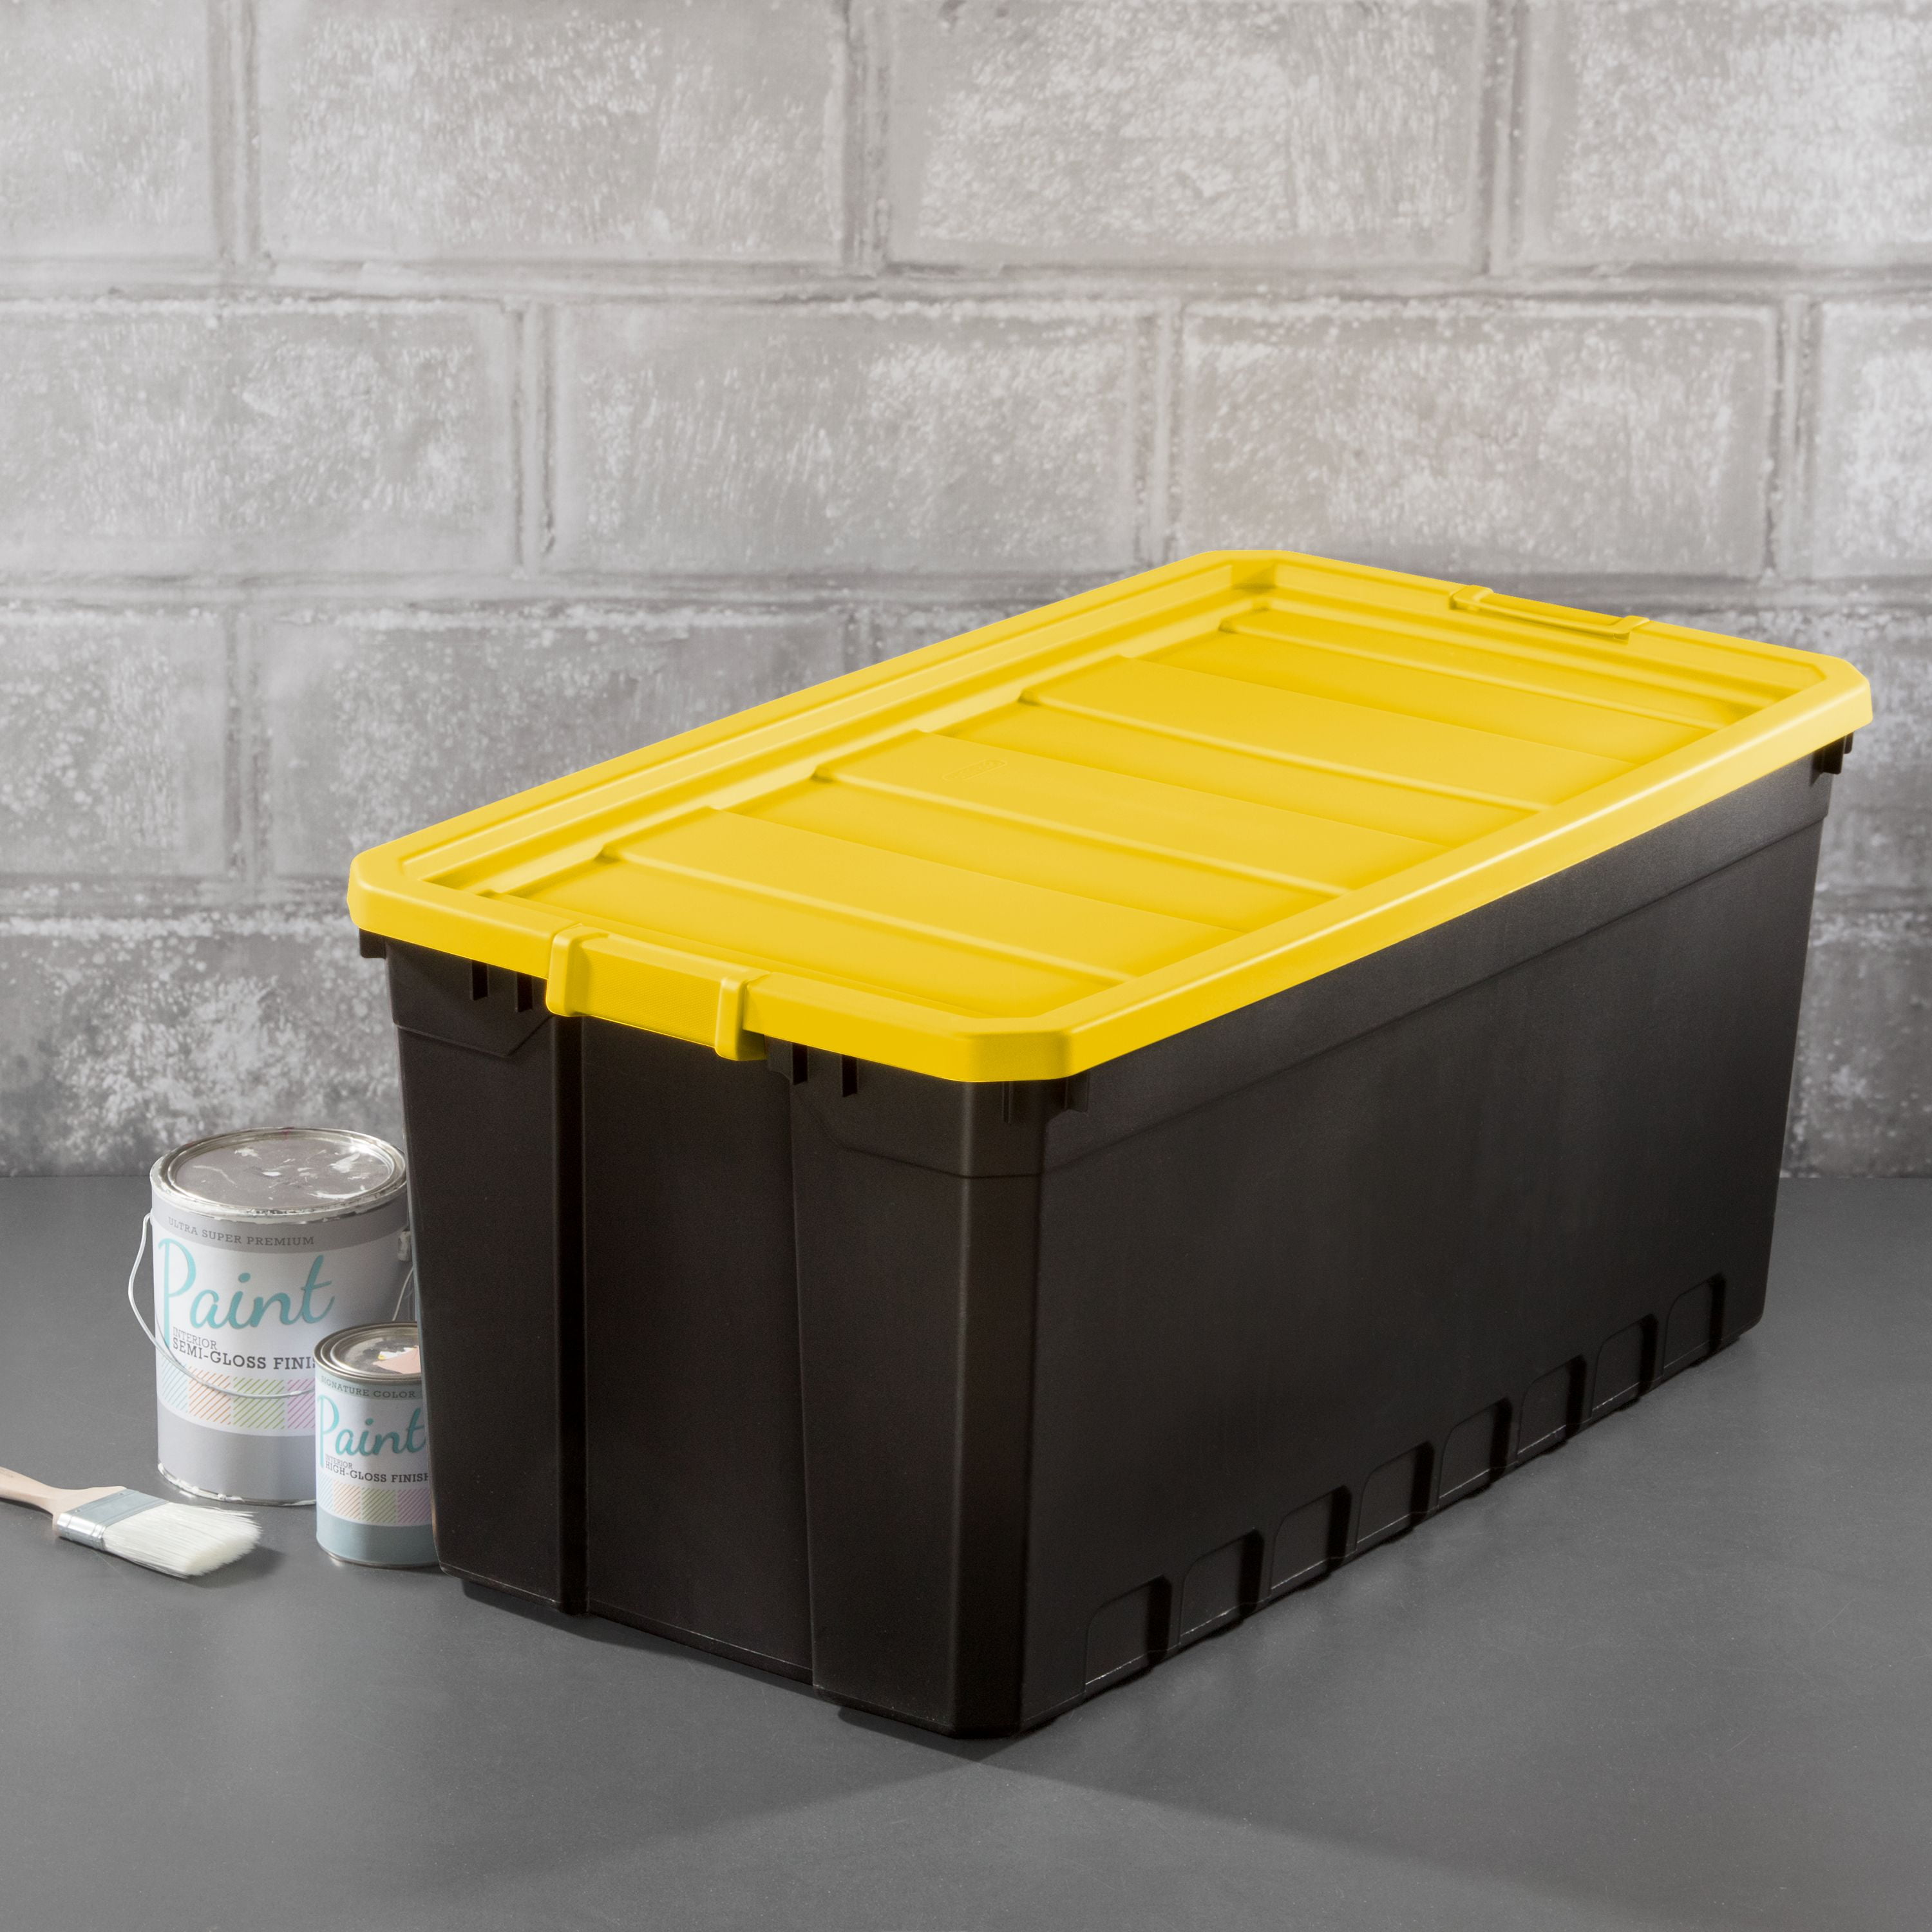 Sterilite 50 Gal Stacker Tote, Black (Available in Case of 3 or Single Unit)